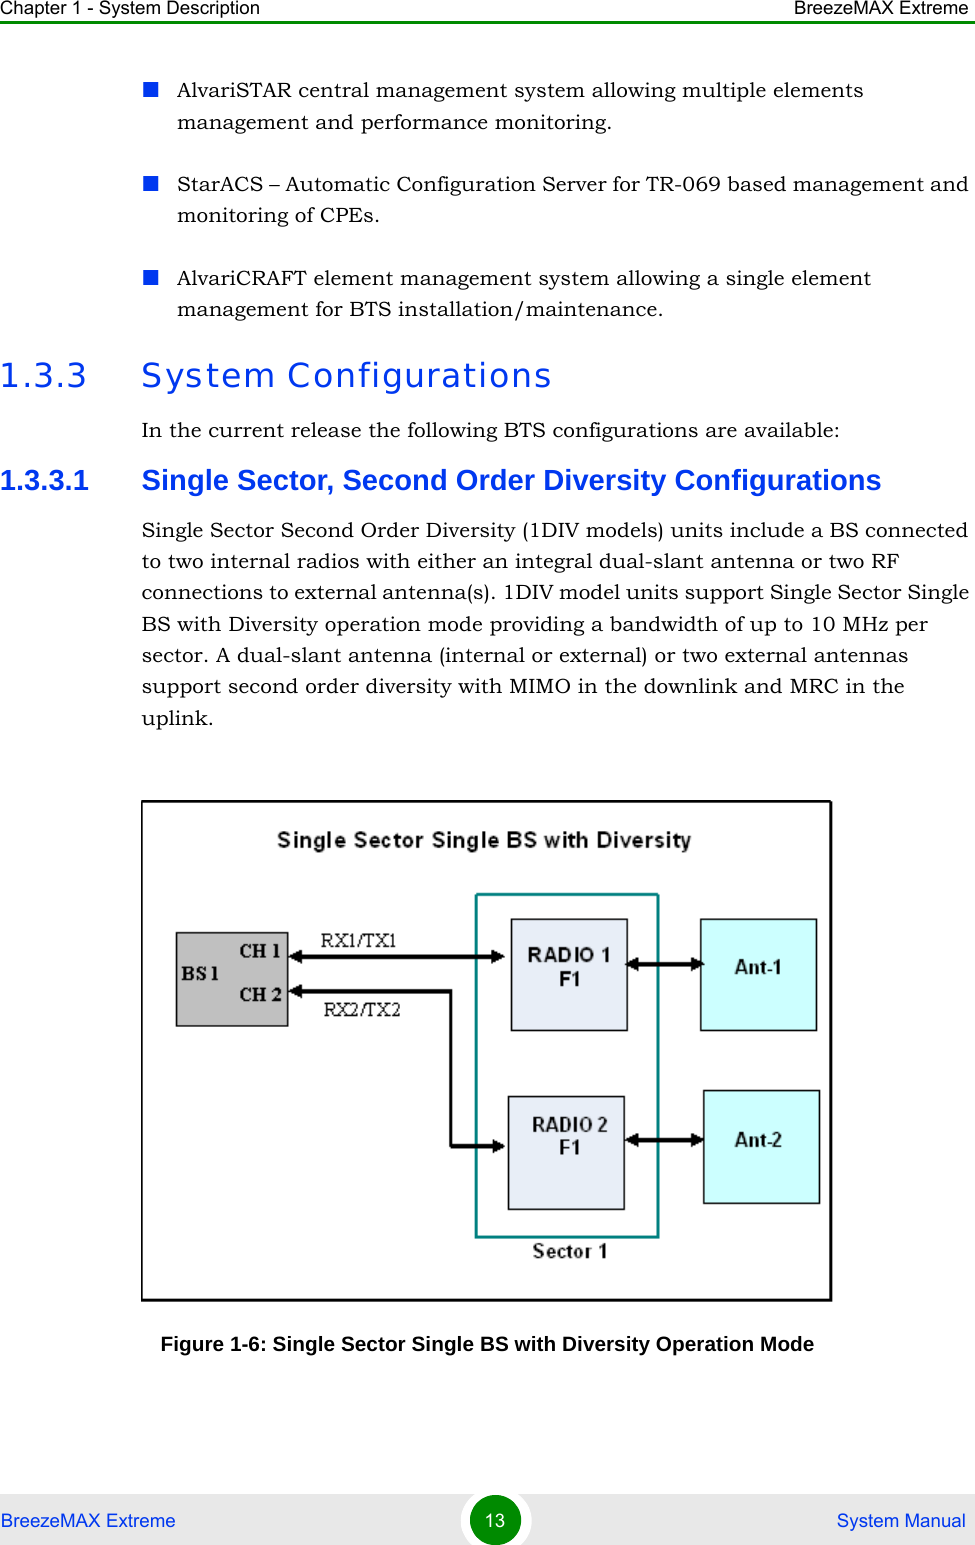 Chapter 1 - System Description BreezeMAX ExtremeBreezeMAX Extreme 13  System ManualAlvariSTAR central management system allowing multiple elements management and performance monitoring.StarACS – Automatic Configuration Server for TR-069 based management and monitoring of CPEs. AlvariCRAFT element management system allowing a single element management for BTS installation/maintenance.1.3.3 System ConfigurationsIn the current release the following BTS configurations are available:1.3.3.1 Single Sector, Second Order Diversity ConfigurationsSingle Sector Second Order Diversity (1DIV models) units include a BS connected to two internal radios with either an integral dual-slant antenna or two RF connections to external antenna(s). 1DIV model units support Single Sector Single BS with Diversity operation mode providing a bandwidth of up to 10 MHz per sector. A dual-slant antenna (internal or external) or two external antennas support second order diversity with MIMO in the downlink and MRC in the uplink.Figure 1-6: Single Sector Single BS with Diversity Operation Mode